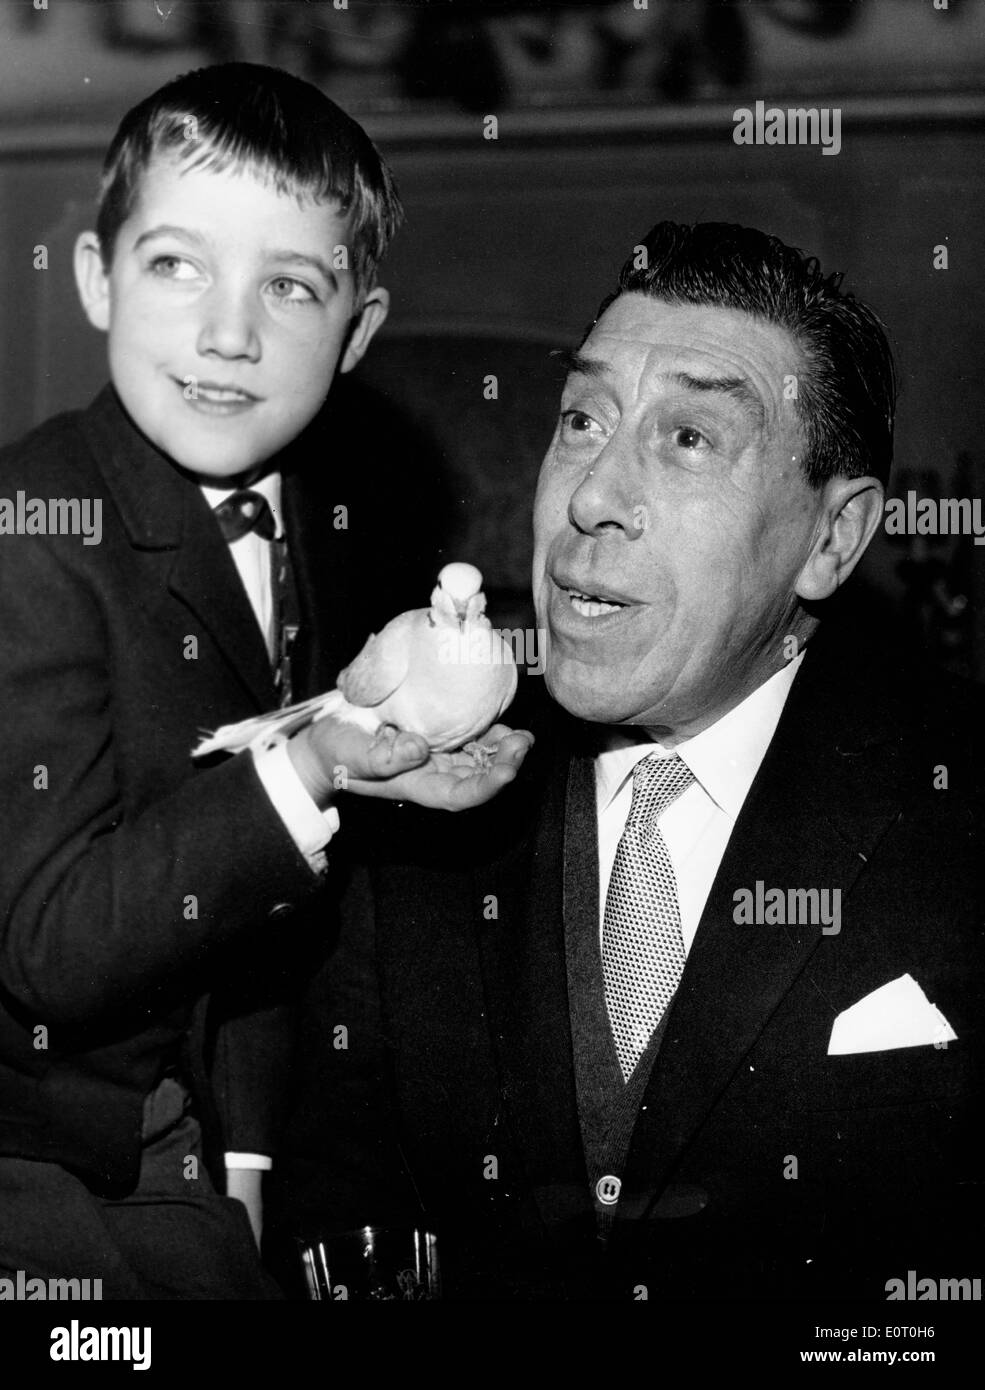 Actor Fernandel with young boy holding bird Stock Photo